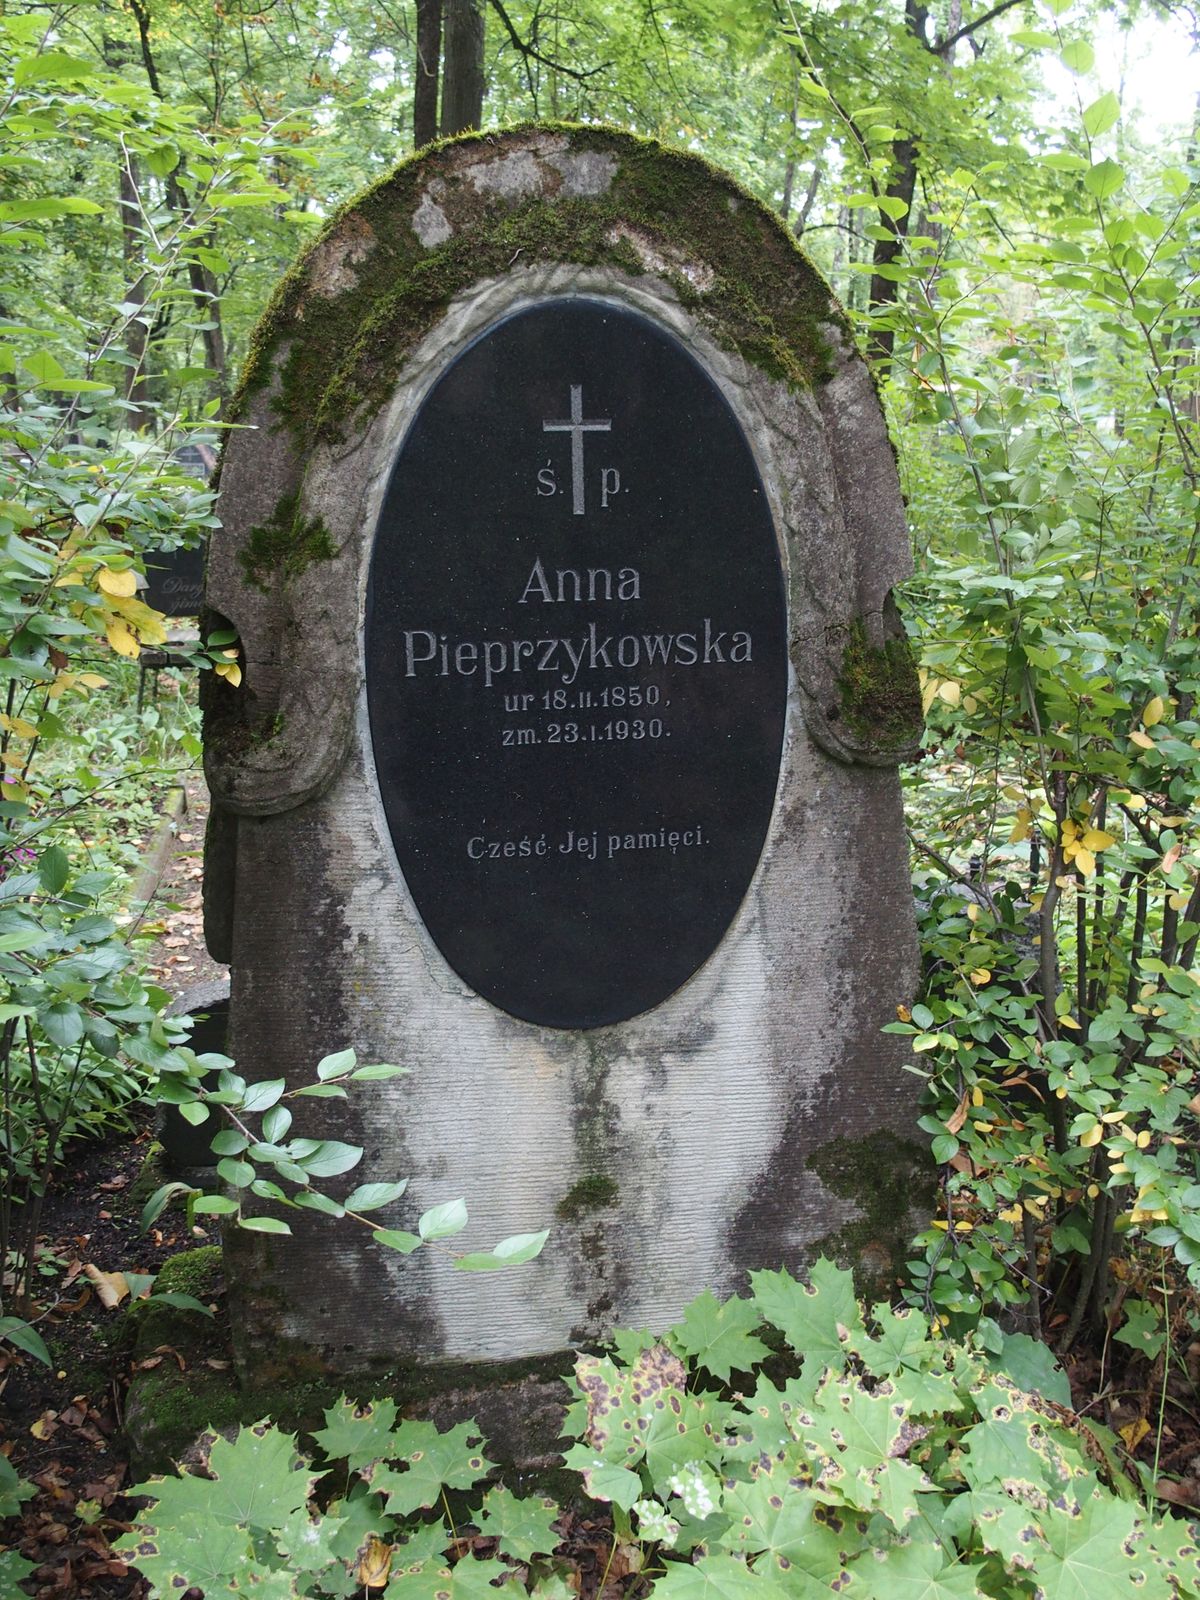 Tombstone of Anna Pieprzykowska, St Michael's cemetery in Riga, as of 2021.